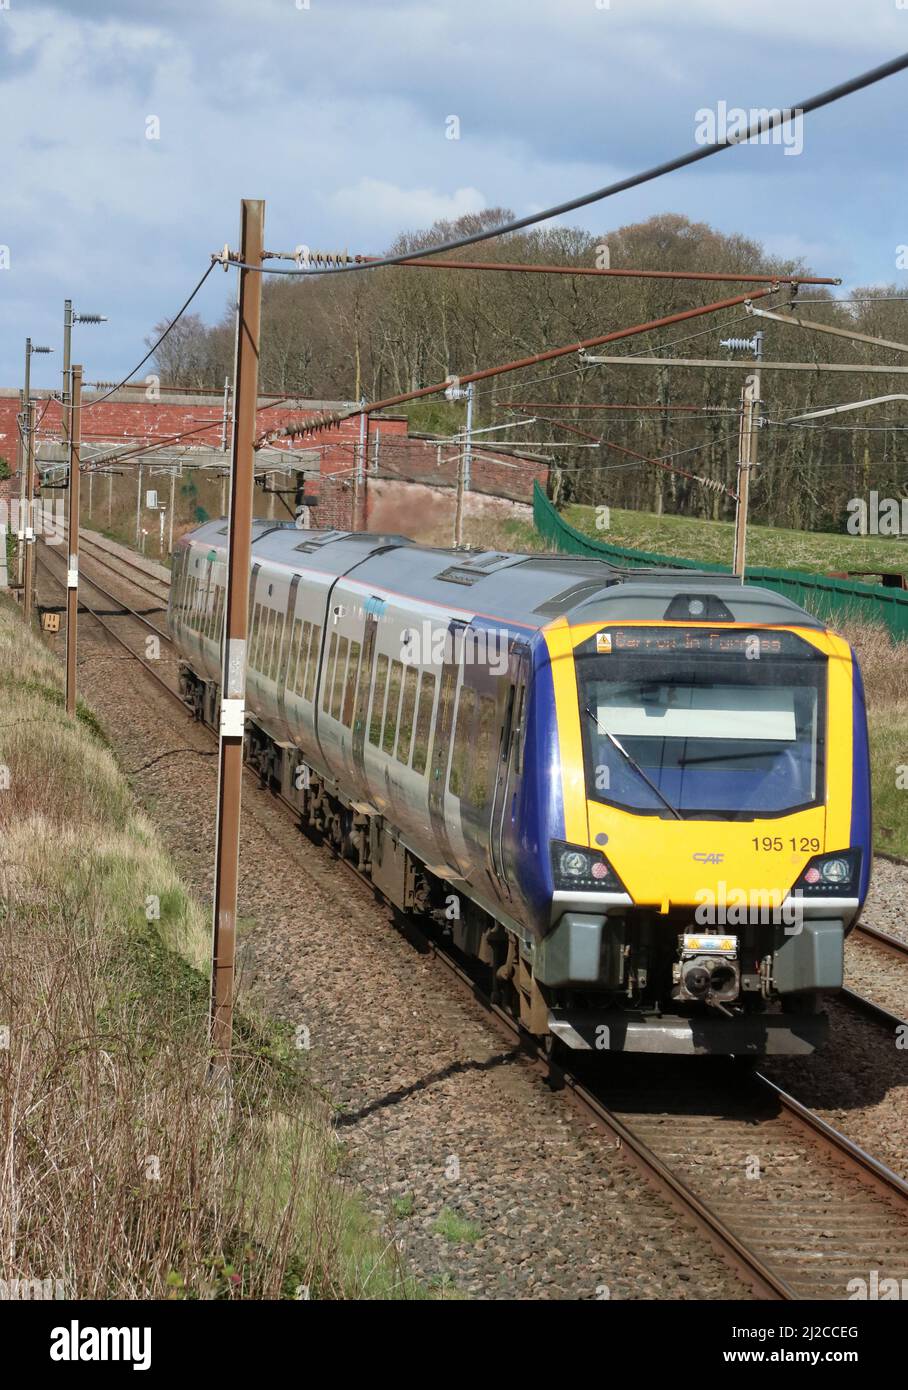 Norther trains Civity dmu, number 195129, on West Coast Main Line near Garstang, with Manchester Airport to Barrow service on 31st March 2022. Stock Photo